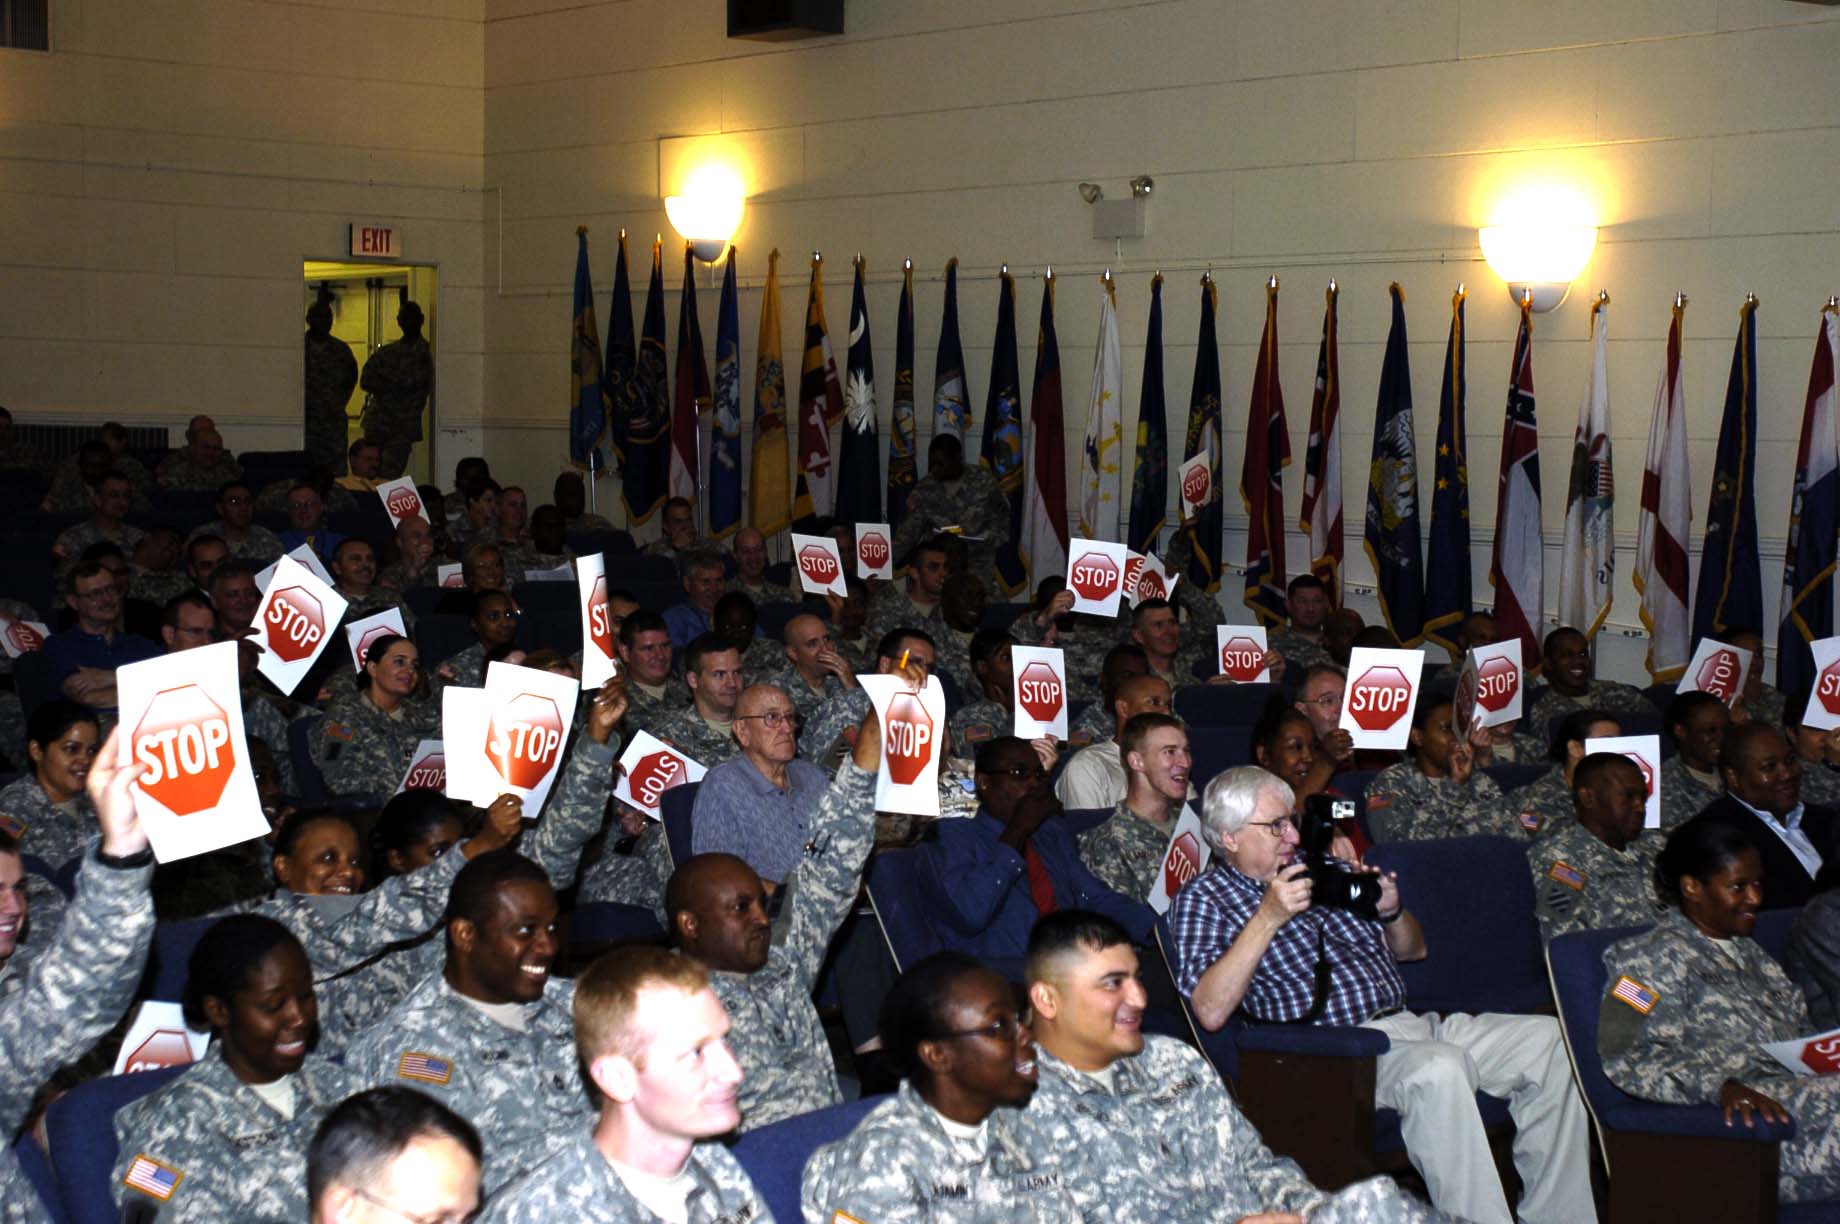 Army 51113 Despite laughs, Sex Signals shows sexual assault is no joke.jpg English: Audience members hold up "stop signs" to indicate things are getting